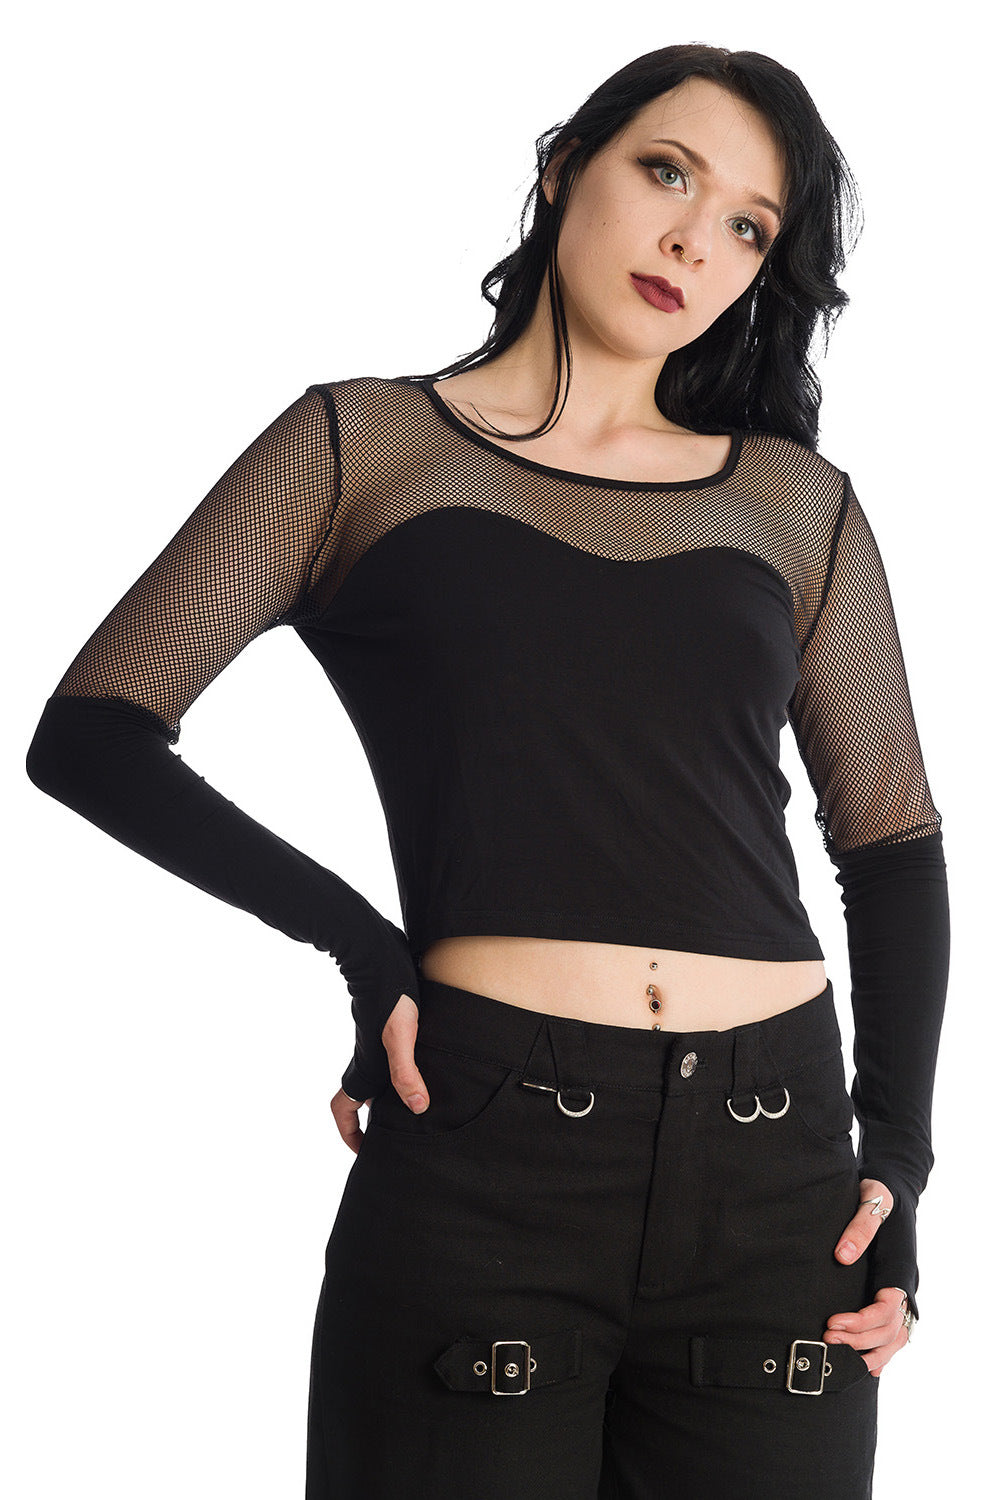 Grunge model wearing mesh long sleeve top with thumb holes in black